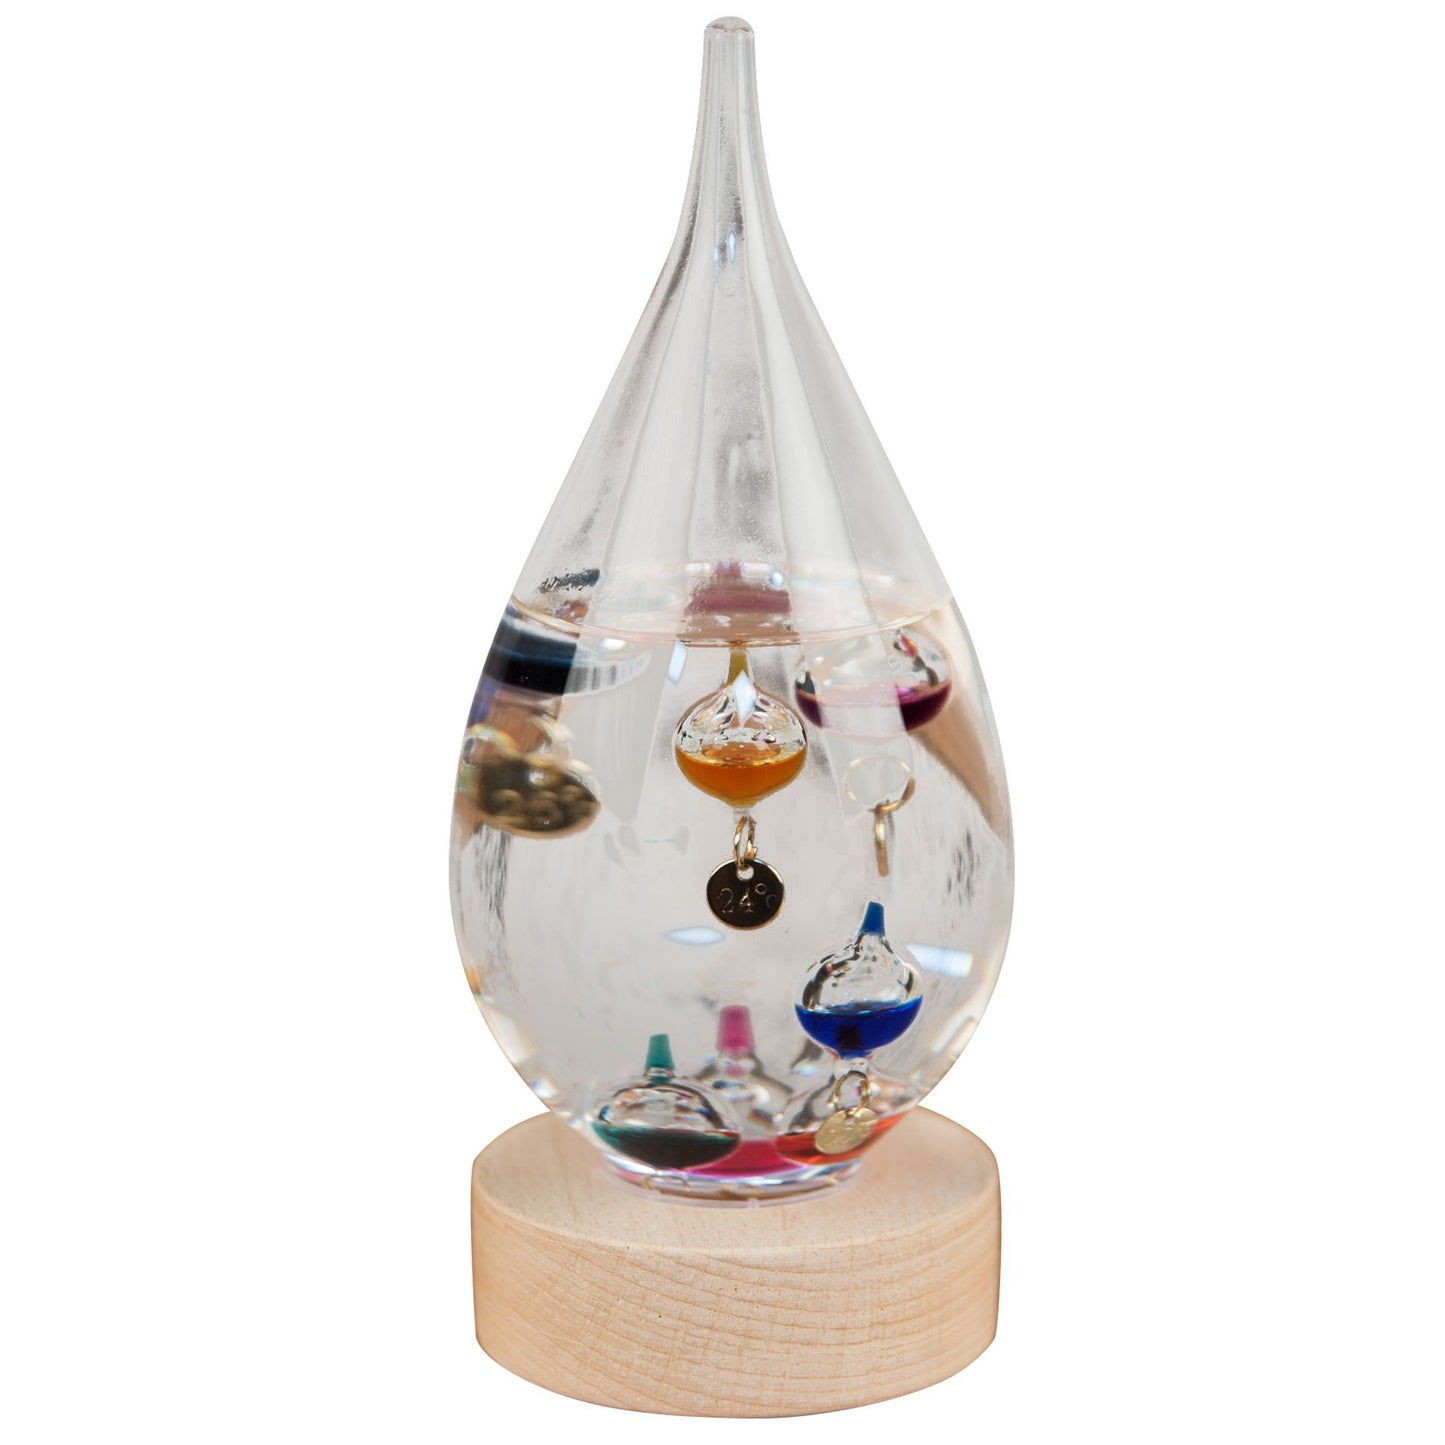 William Widdop Tear Drop Design Galileo Thermometer On Wood Stand